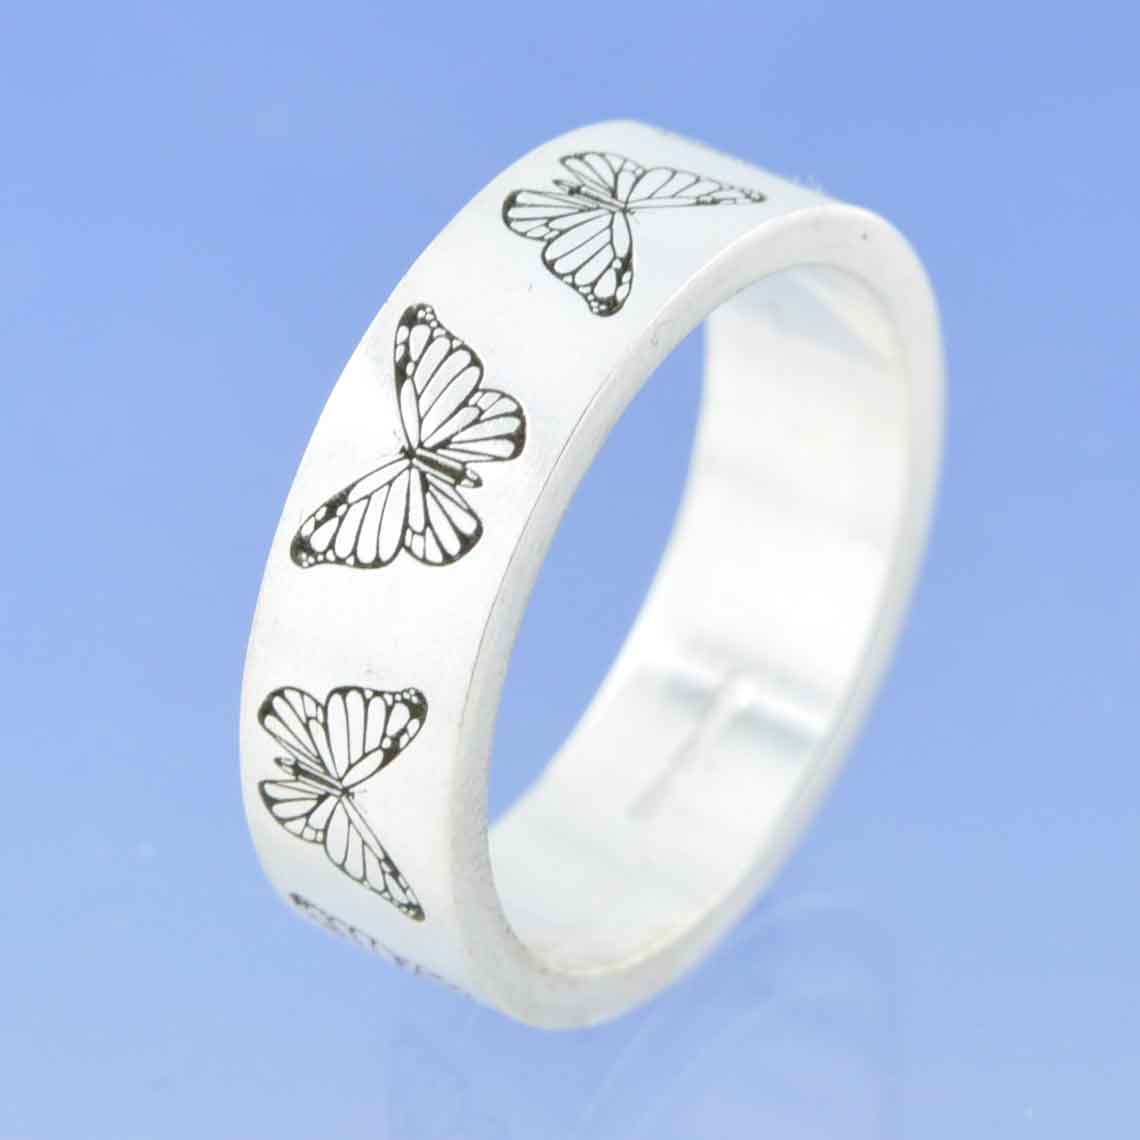 Butterfly Ring with Cremation Ashes Ring by Chris Parry Jewellery